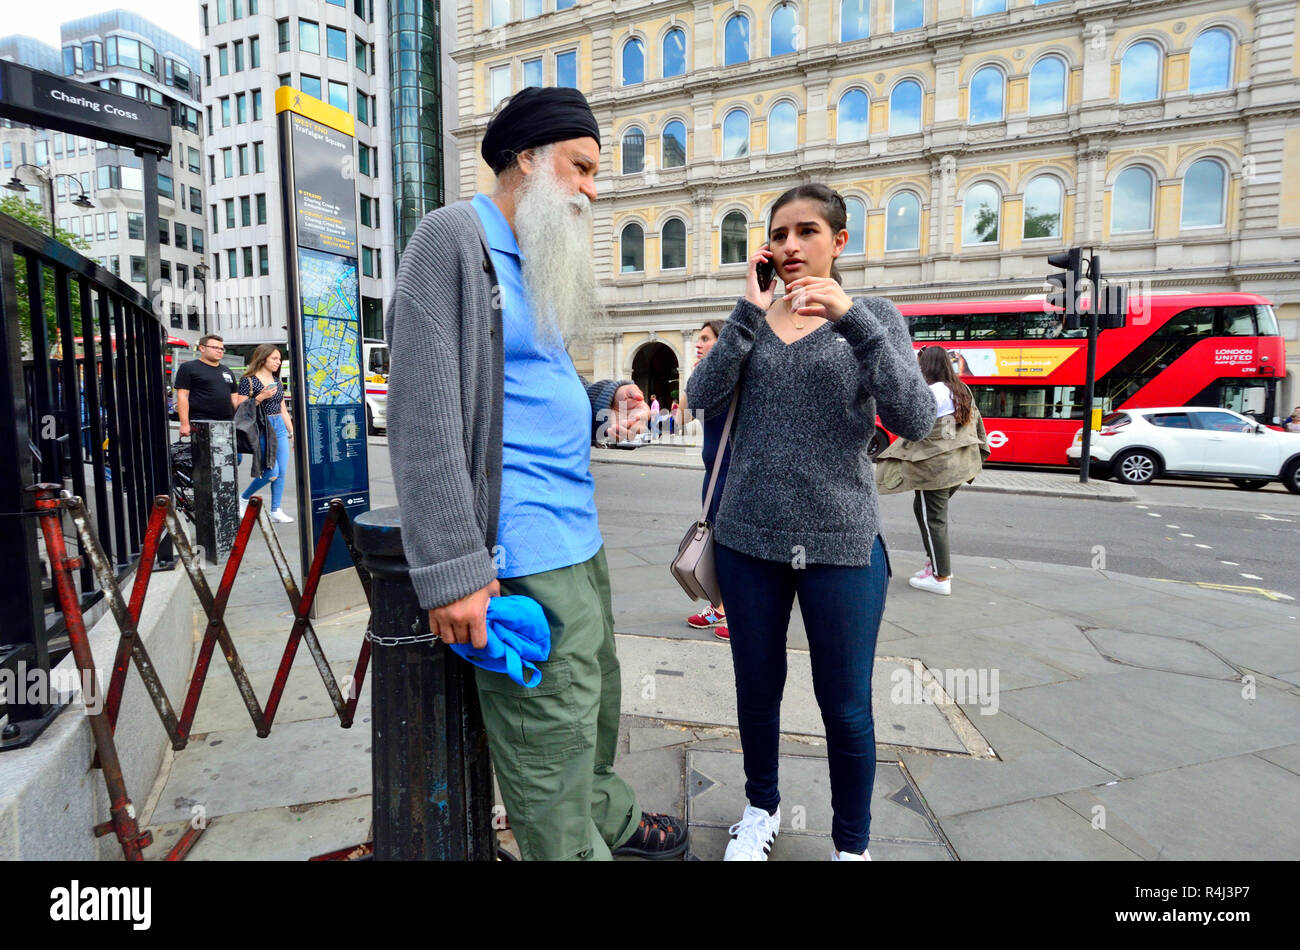 Young Asian woman on her mobile phone in Trafalgar Square, with an older man (father?) London, England, UK. Stock Photo